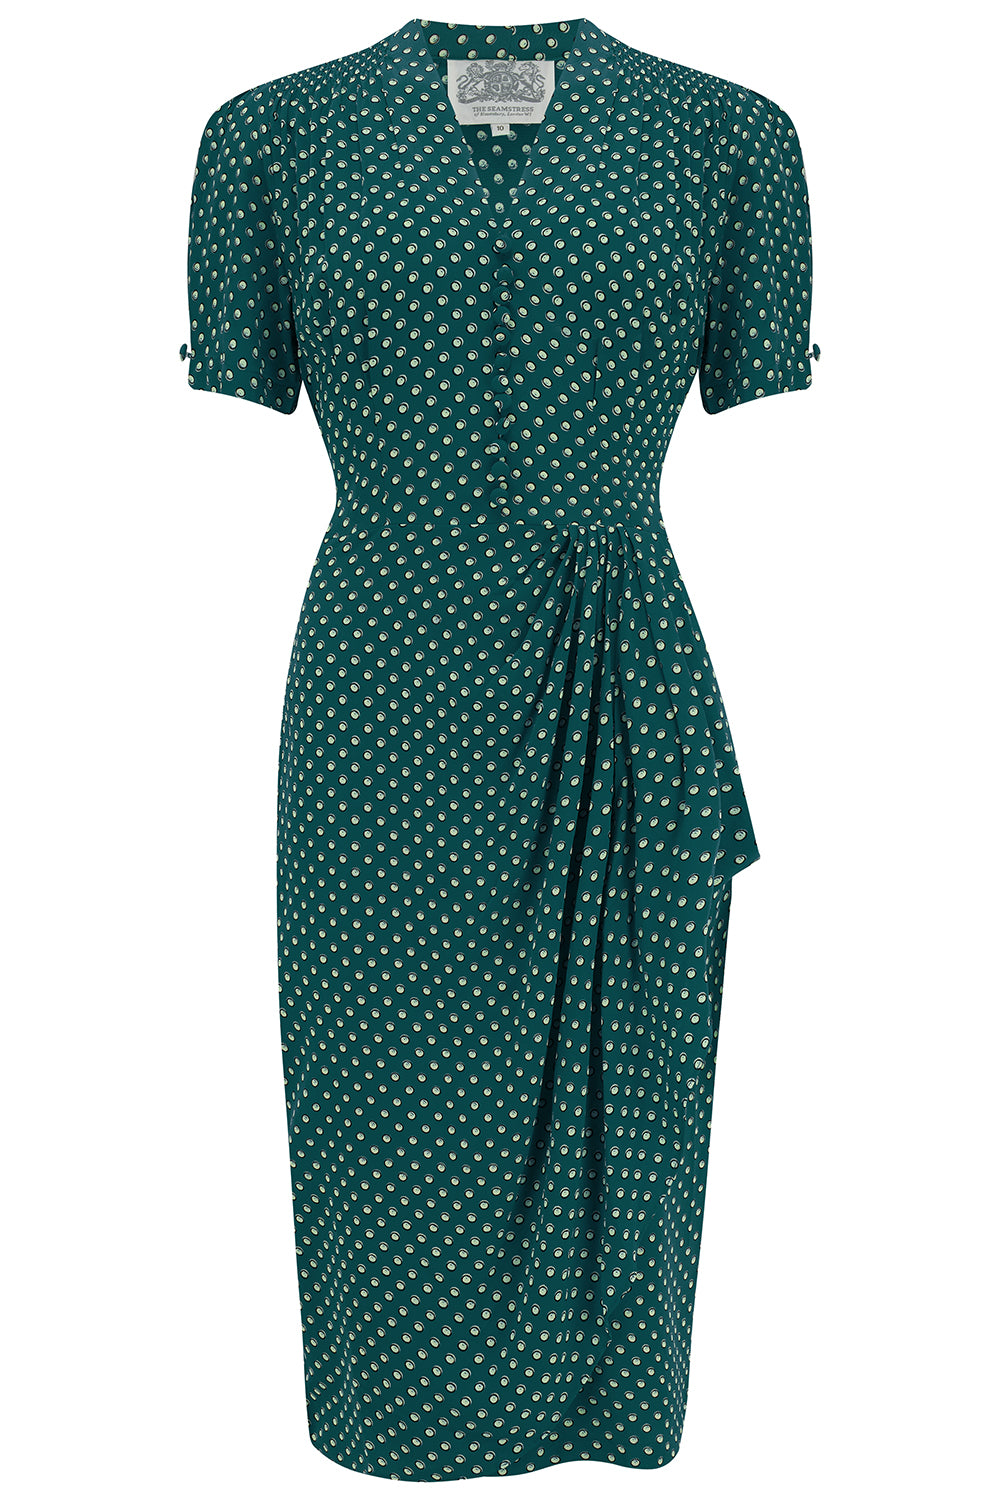 "Mabel dress "Green Ditsy , A Classic 1940s Inspired Vintage Style CC41 By The Seamstress Of Bloomsbury - True and authentic vintage style clothing, inspired by the Classic styles of CC41 , WW2 and the fun 1950s RocknRoll era, for everyday wear plus events like Goodwood Revival, Twinwood Festival and Viva Las Vegas Rockabilly Weekend Rock n Romance The Seamstress of Bloomsbury